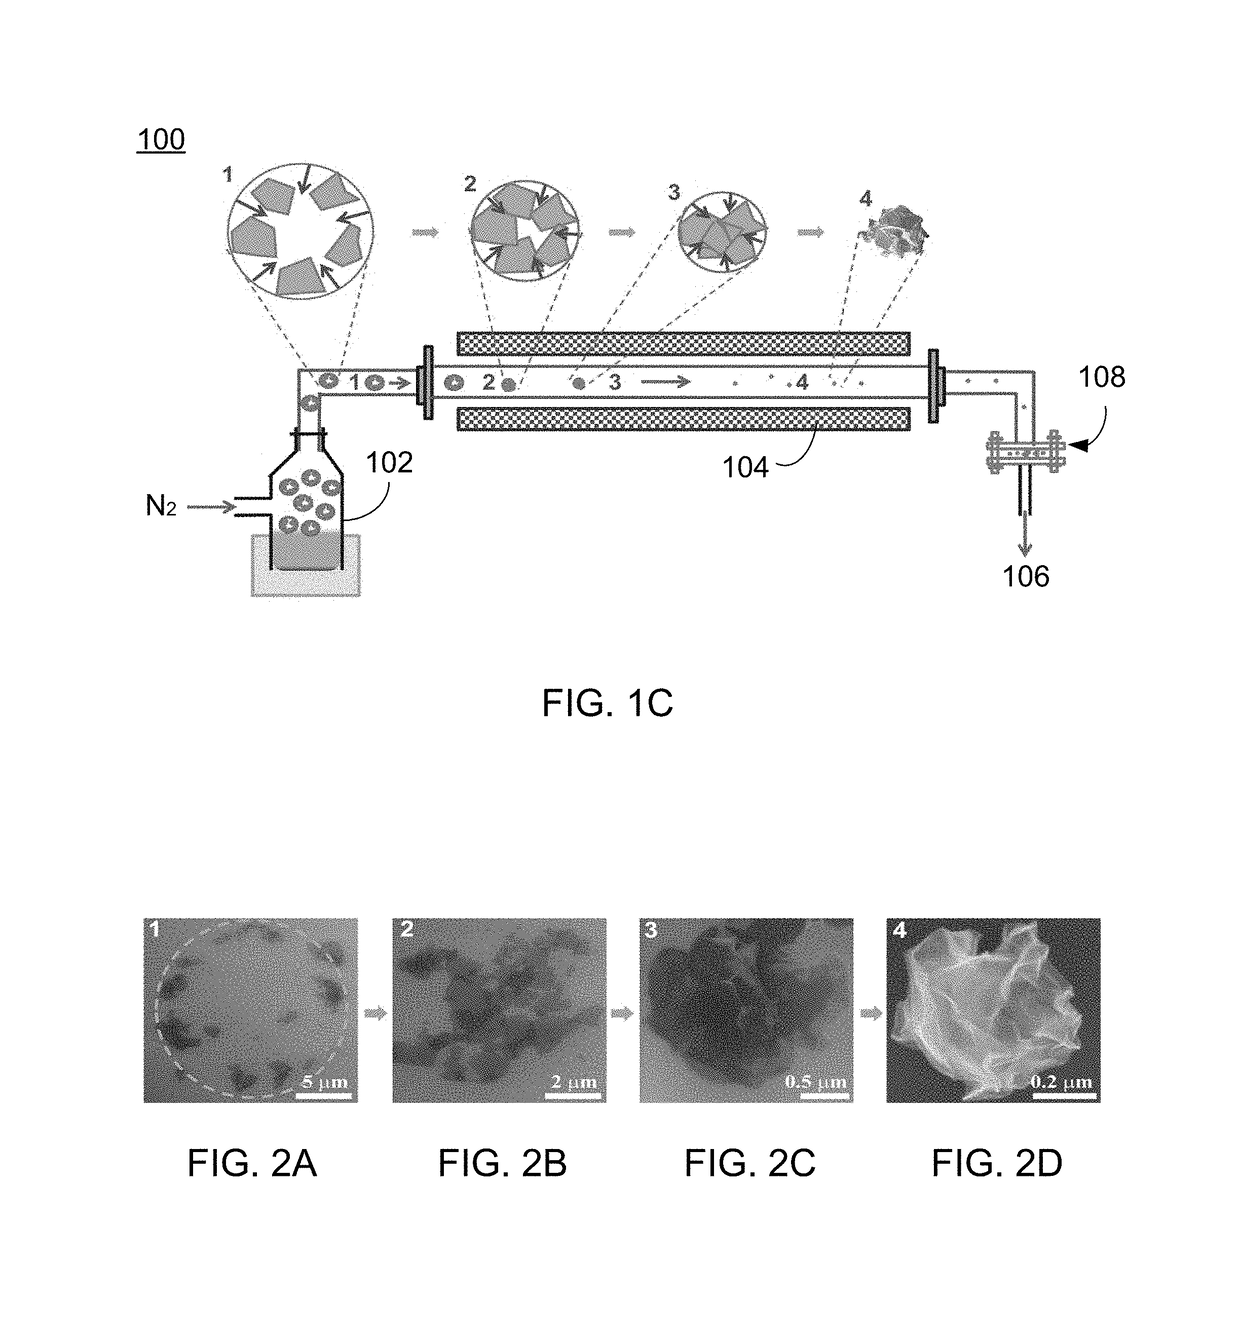 Crumpled particles, methods of synthesizing same and applications using same